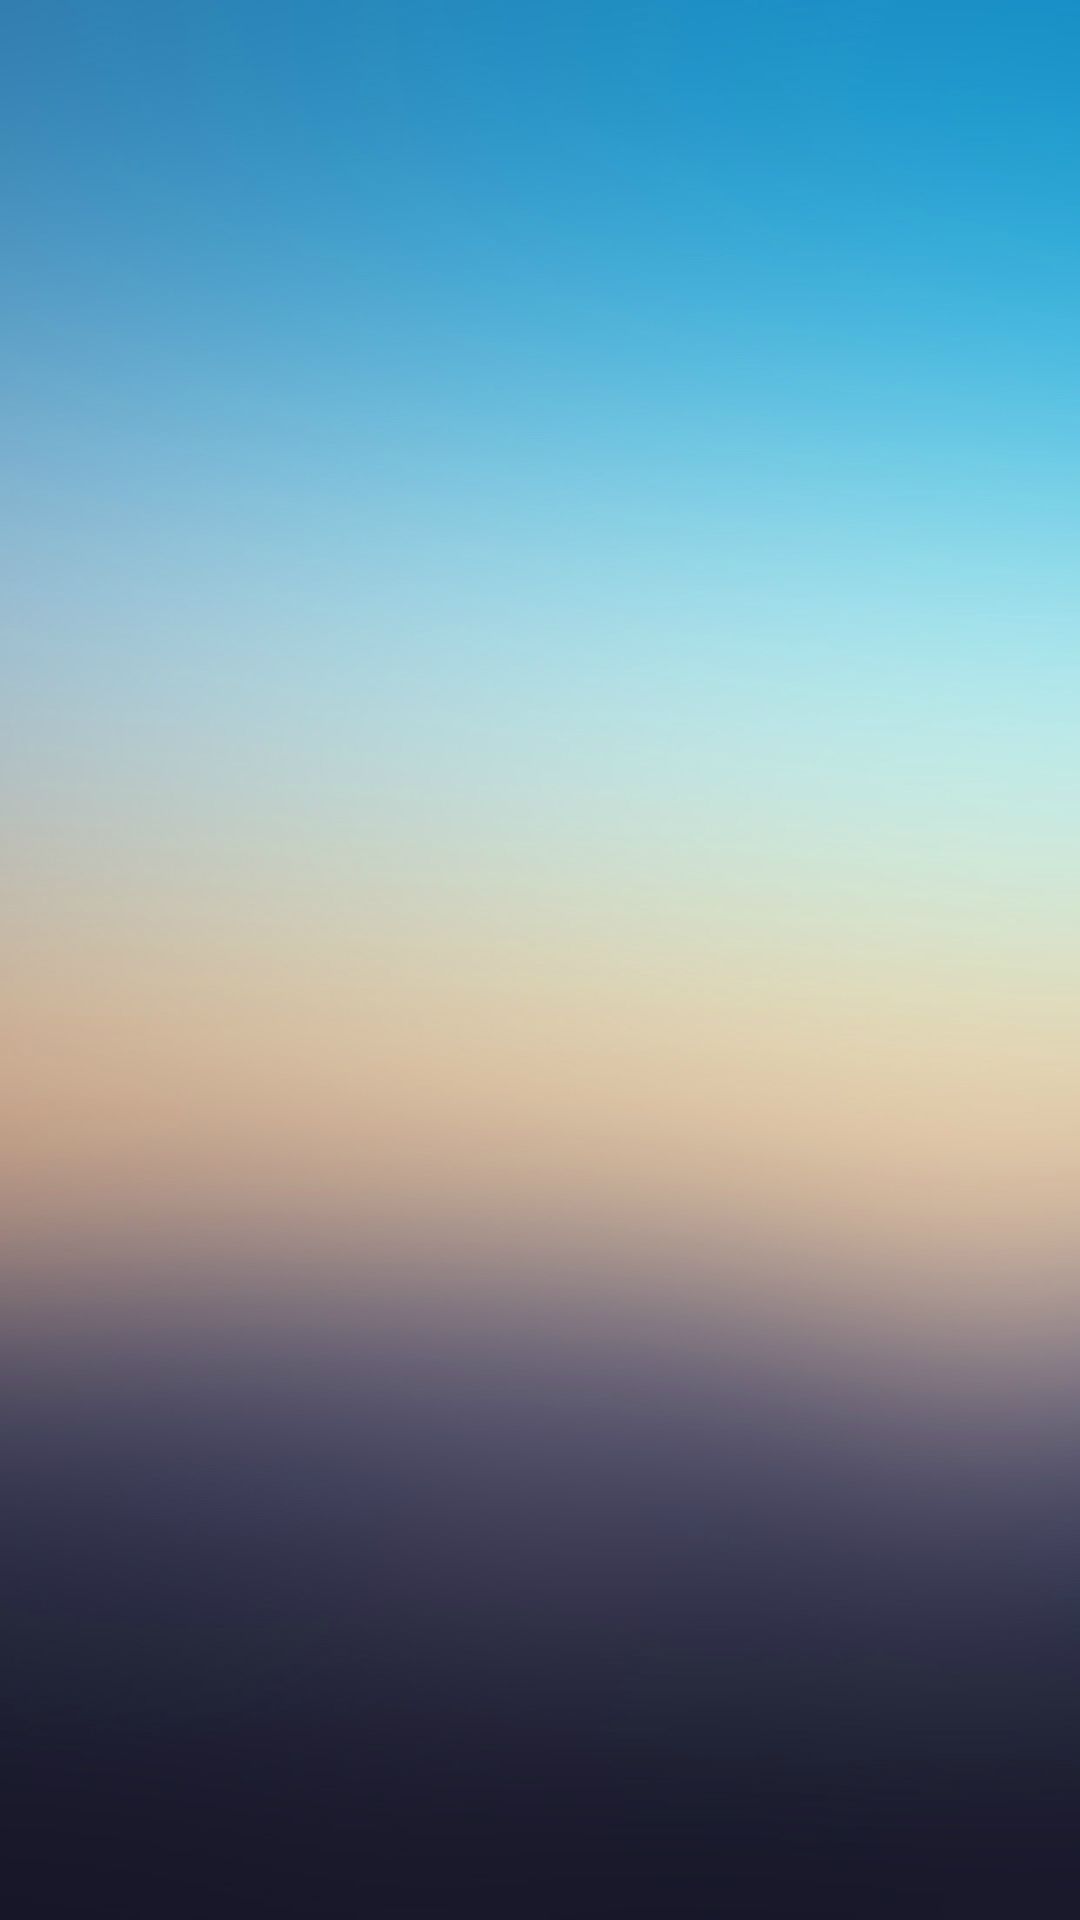 City Blue Day Gradation Blur iPhone 6 Wallpapers Download